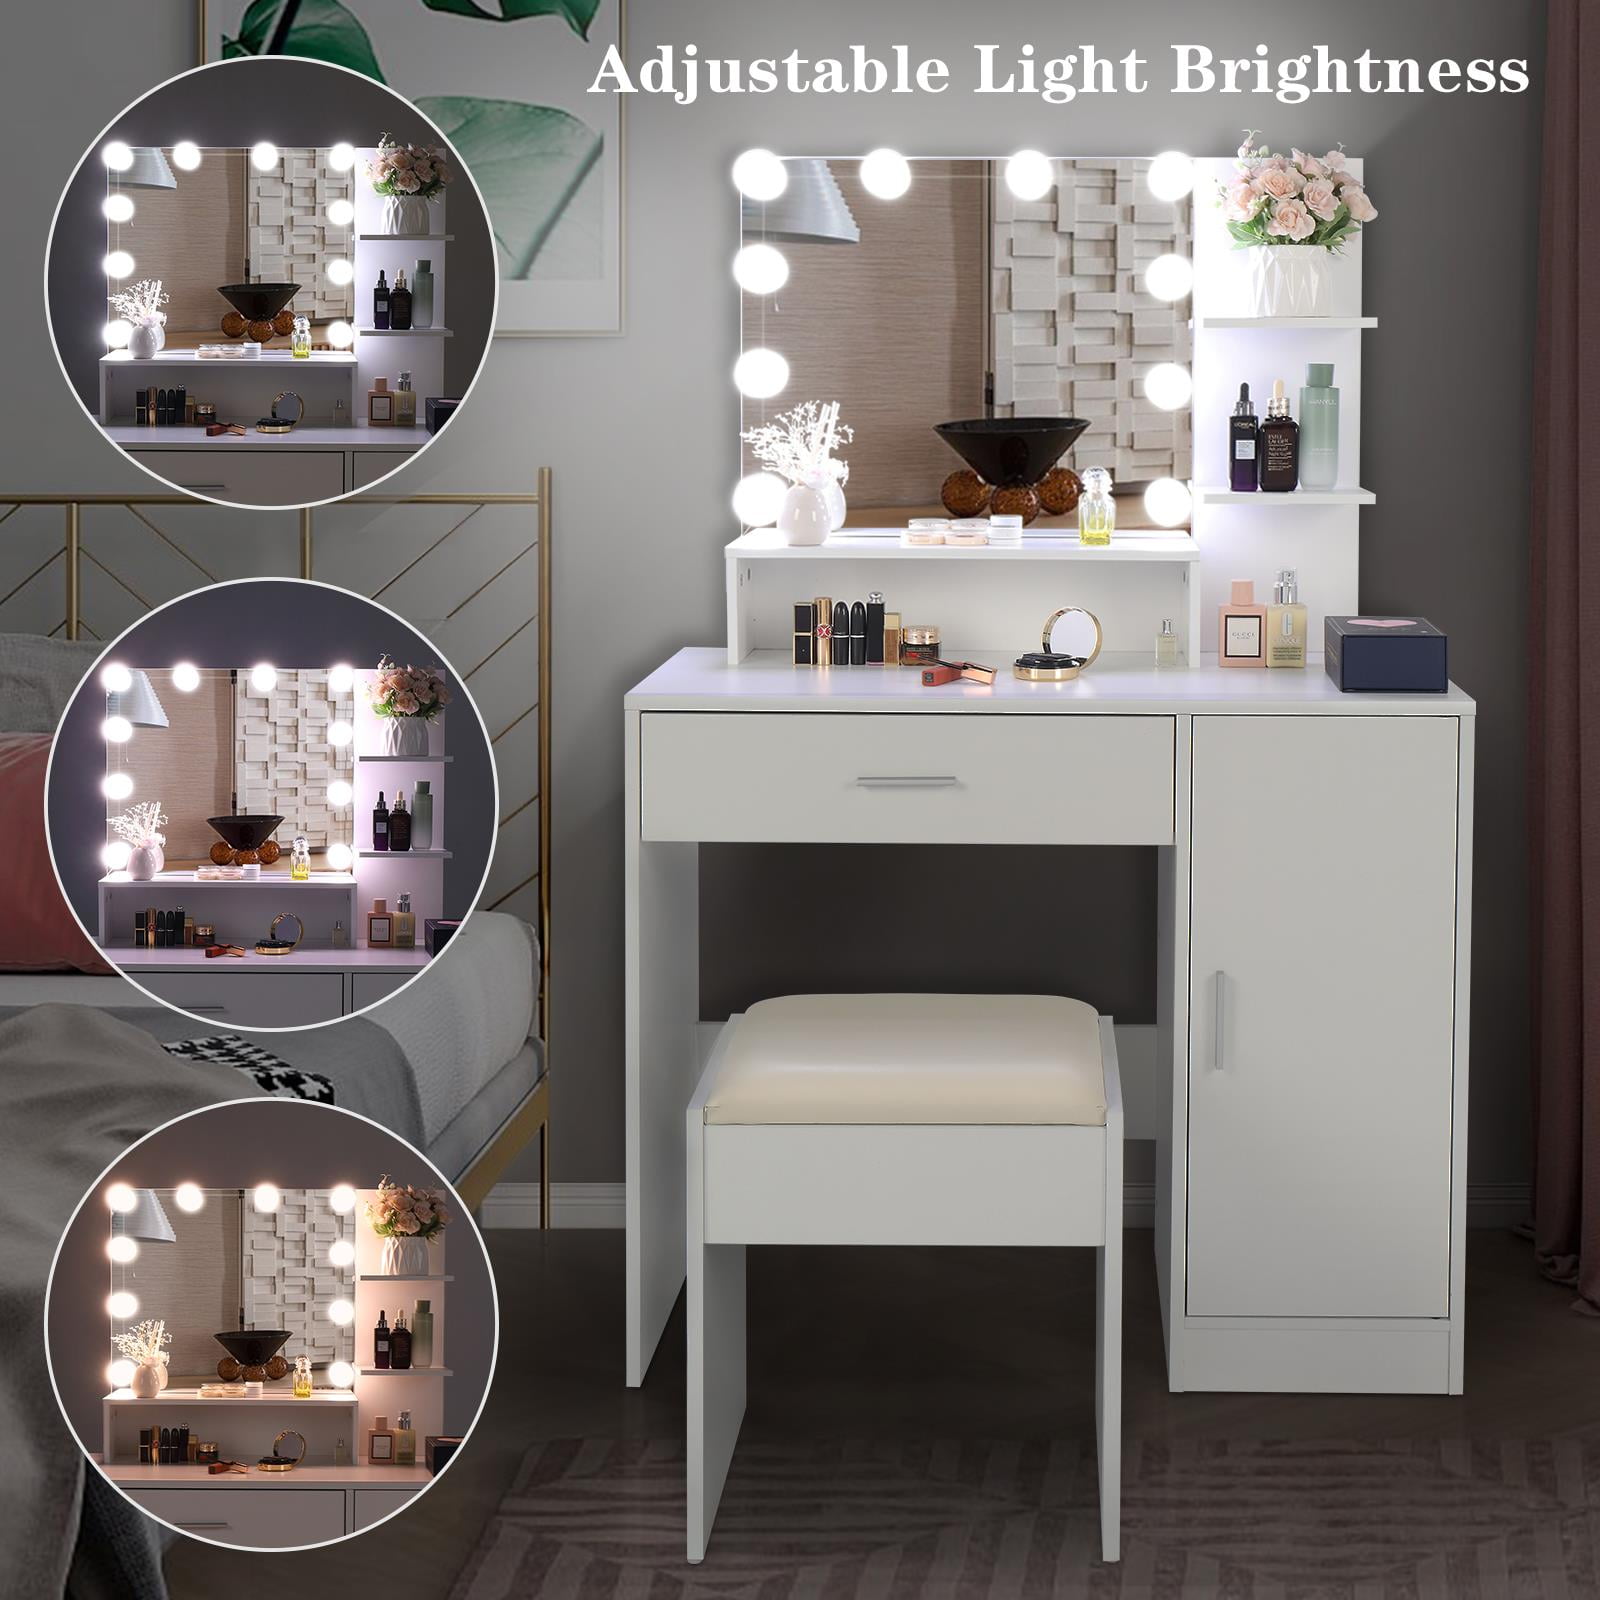 Dressing Table Modern Vanity Makeup Table Set with Sliding Mirror and Storage Shelves,Versatile Makeup Table With Cushioned Stool Dresser Desk for Bedroom